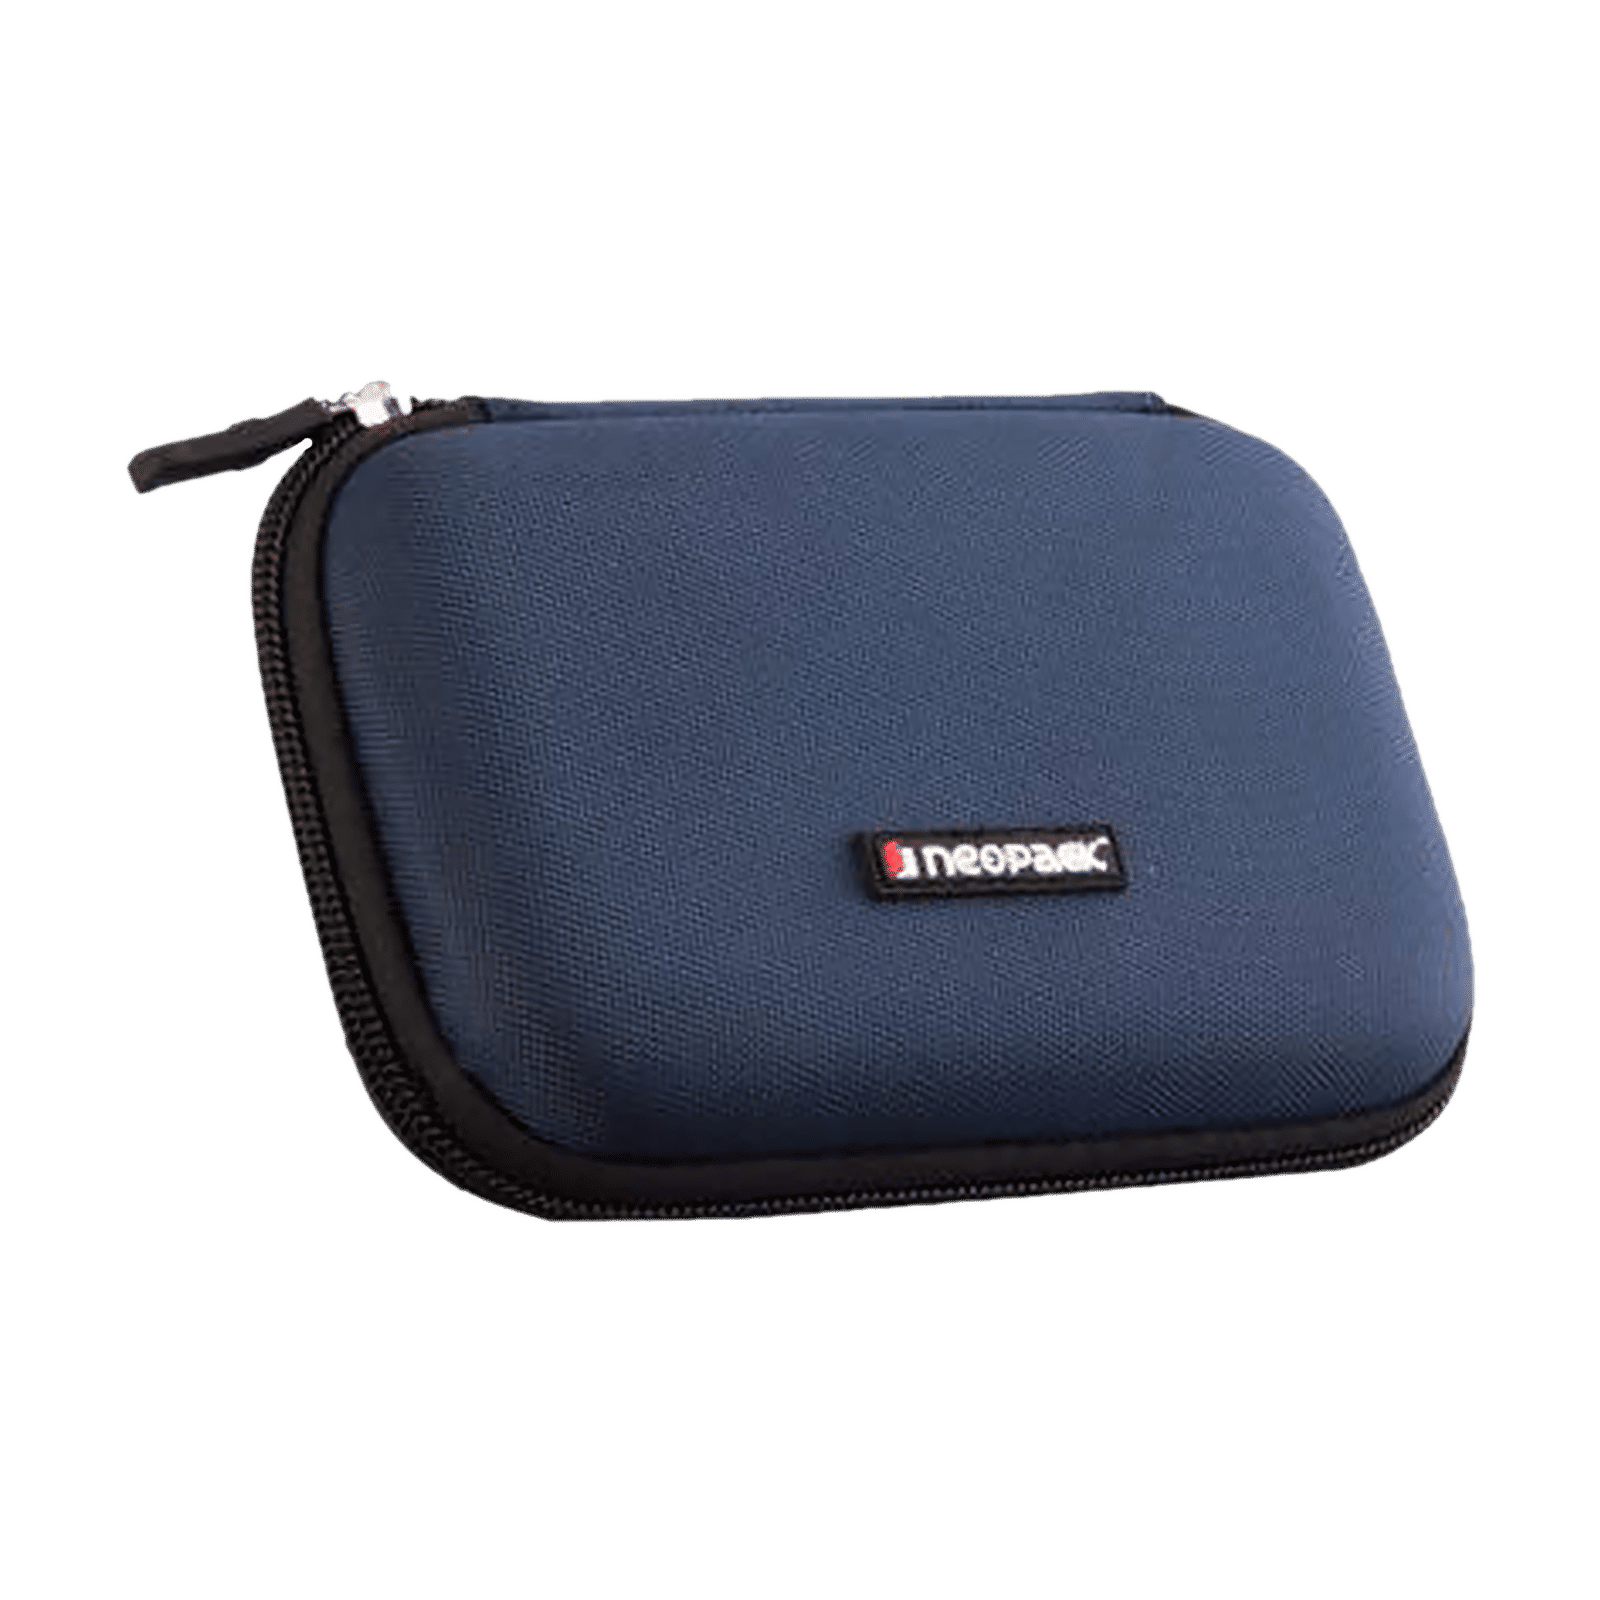 Buy NeoPack 2.5 inch HDD Case (1BL2/1BL4, Blue) Online - Croma